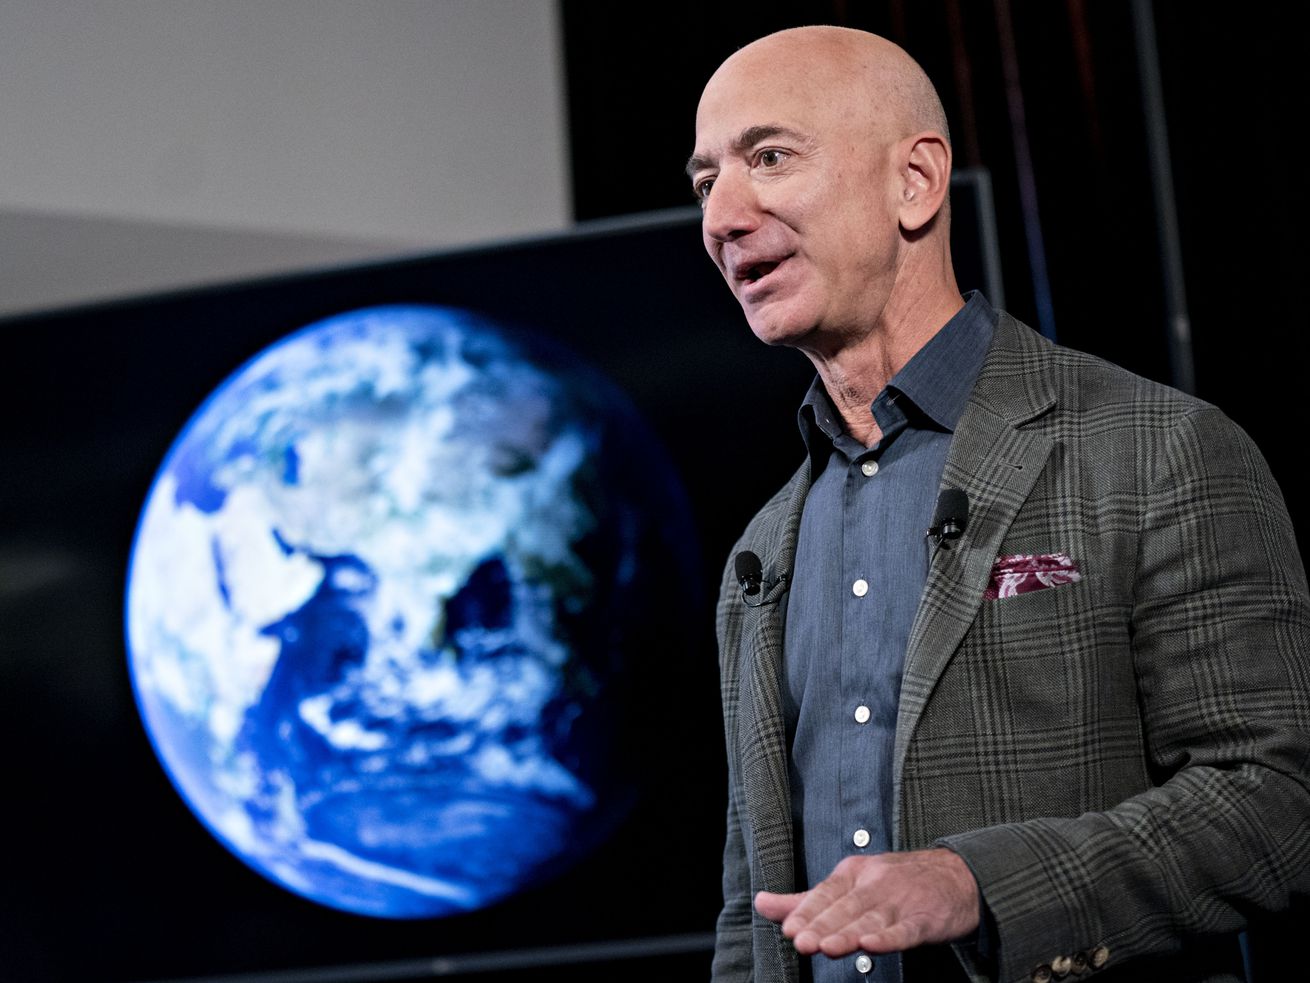 Jeff Bezos speaking onstage in front of a screen showing a picture of the Earth as seen from space.